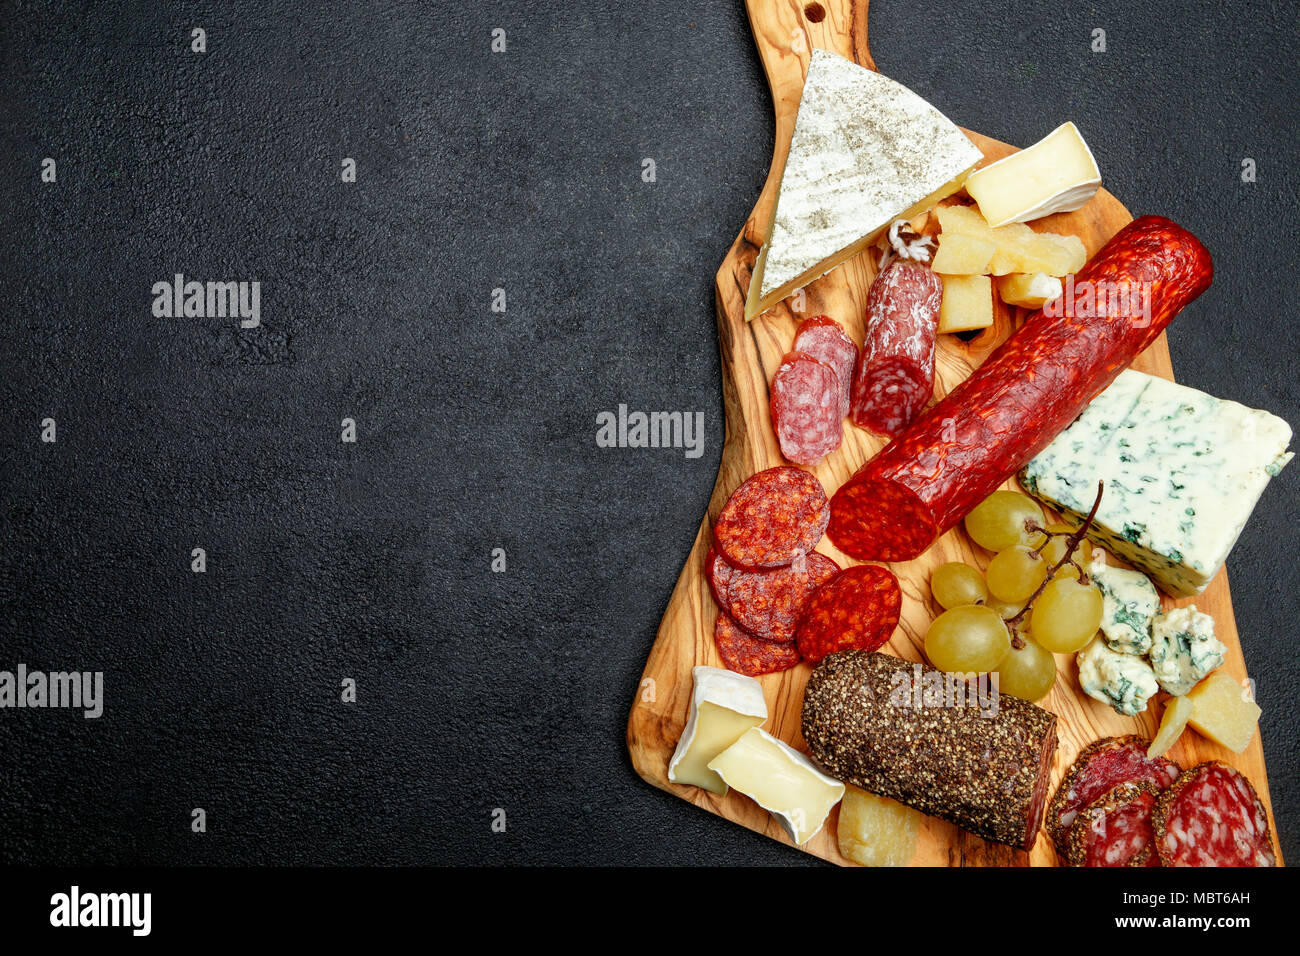 Cold meat cheese plate with salami sausage and cheese Stock Photo